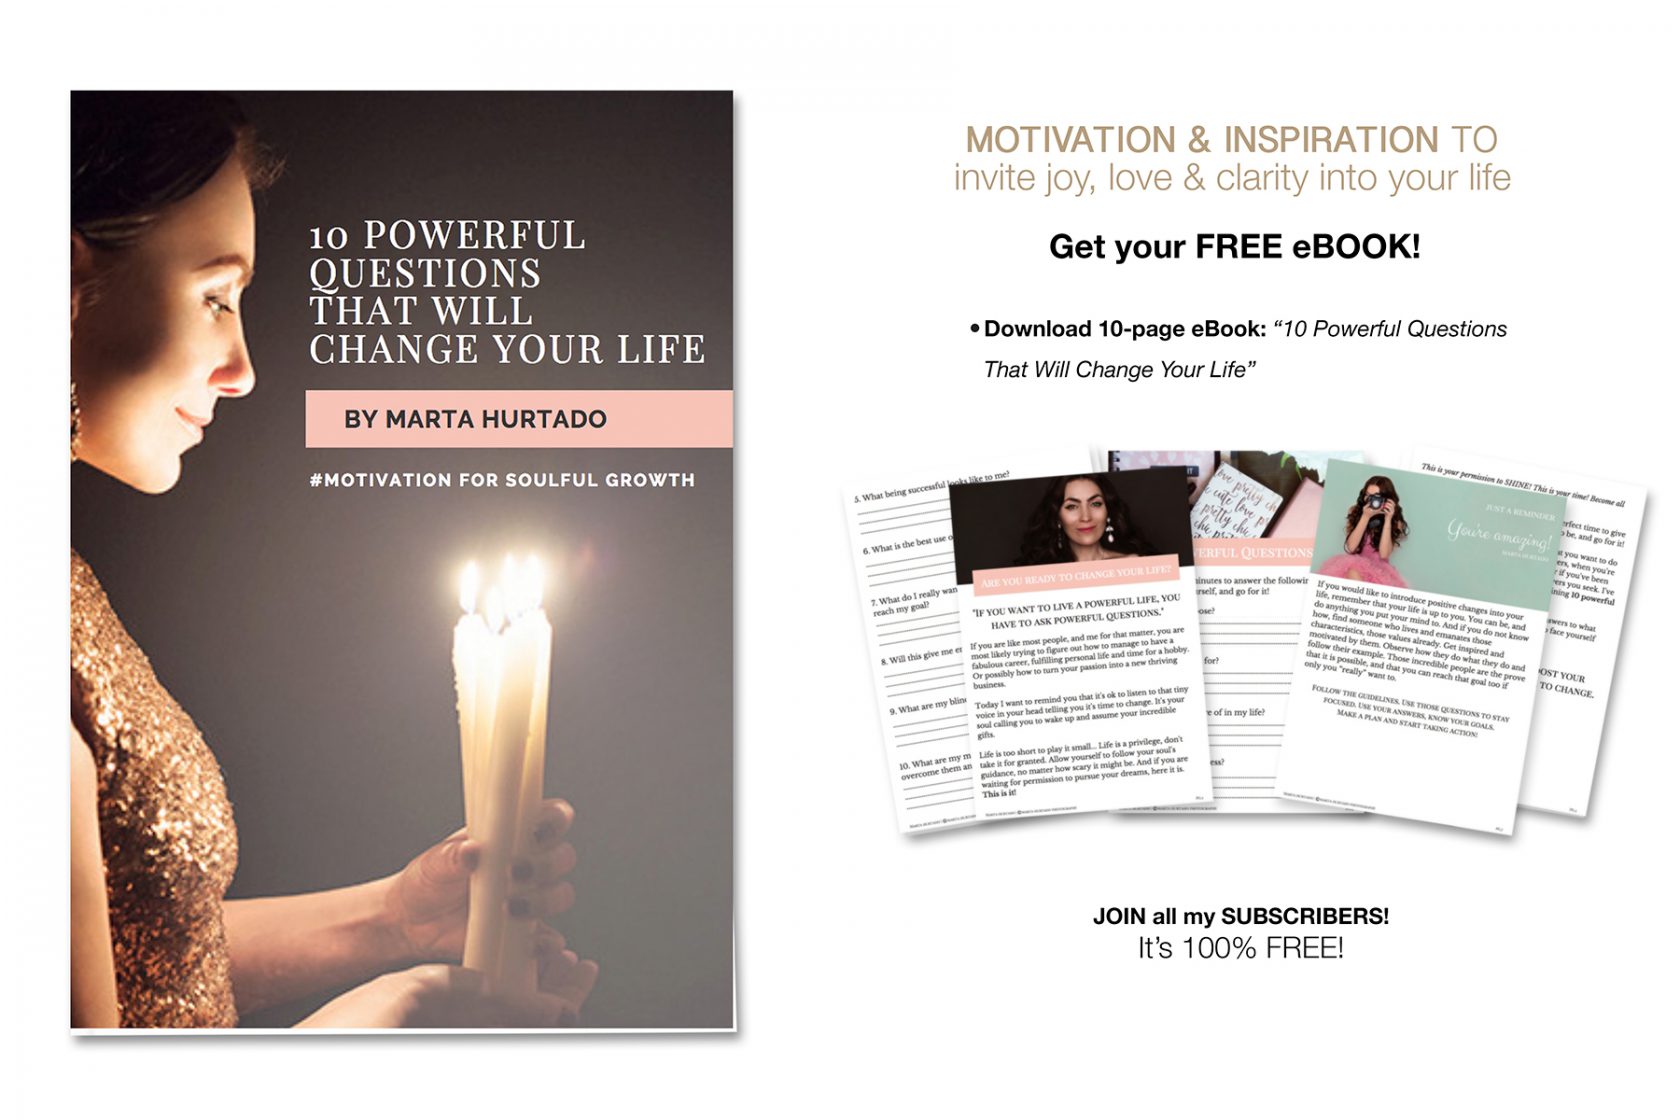 10-Powerful-Questions-That-Will-Change-Your-Life-freebie-eBook-Marta-Hurtado-Portrait-Photography